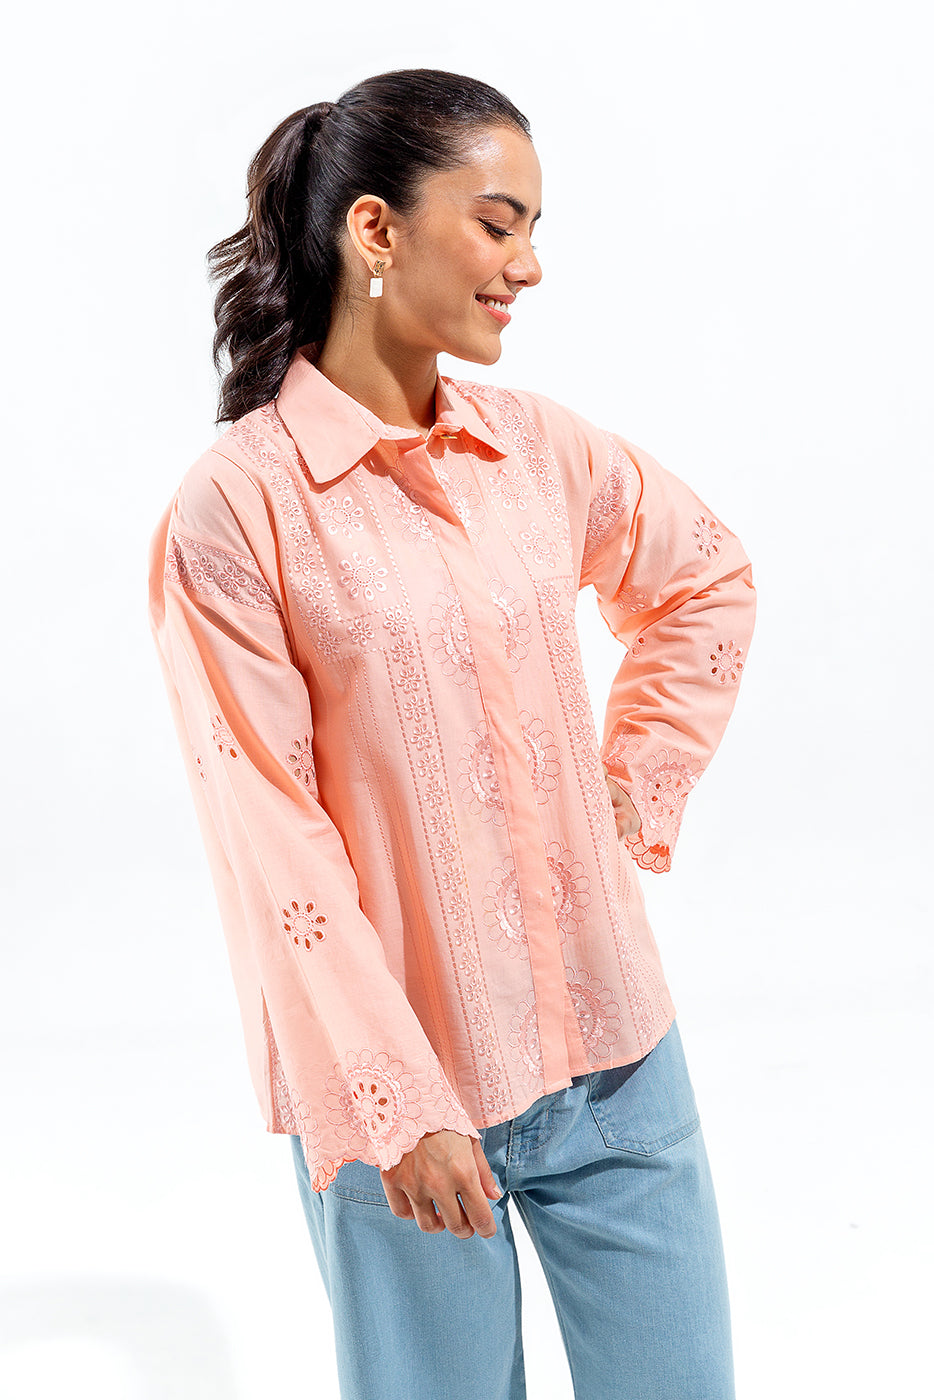 EMBROIDERED LAWN TOP (PRET) - BEECHTREE